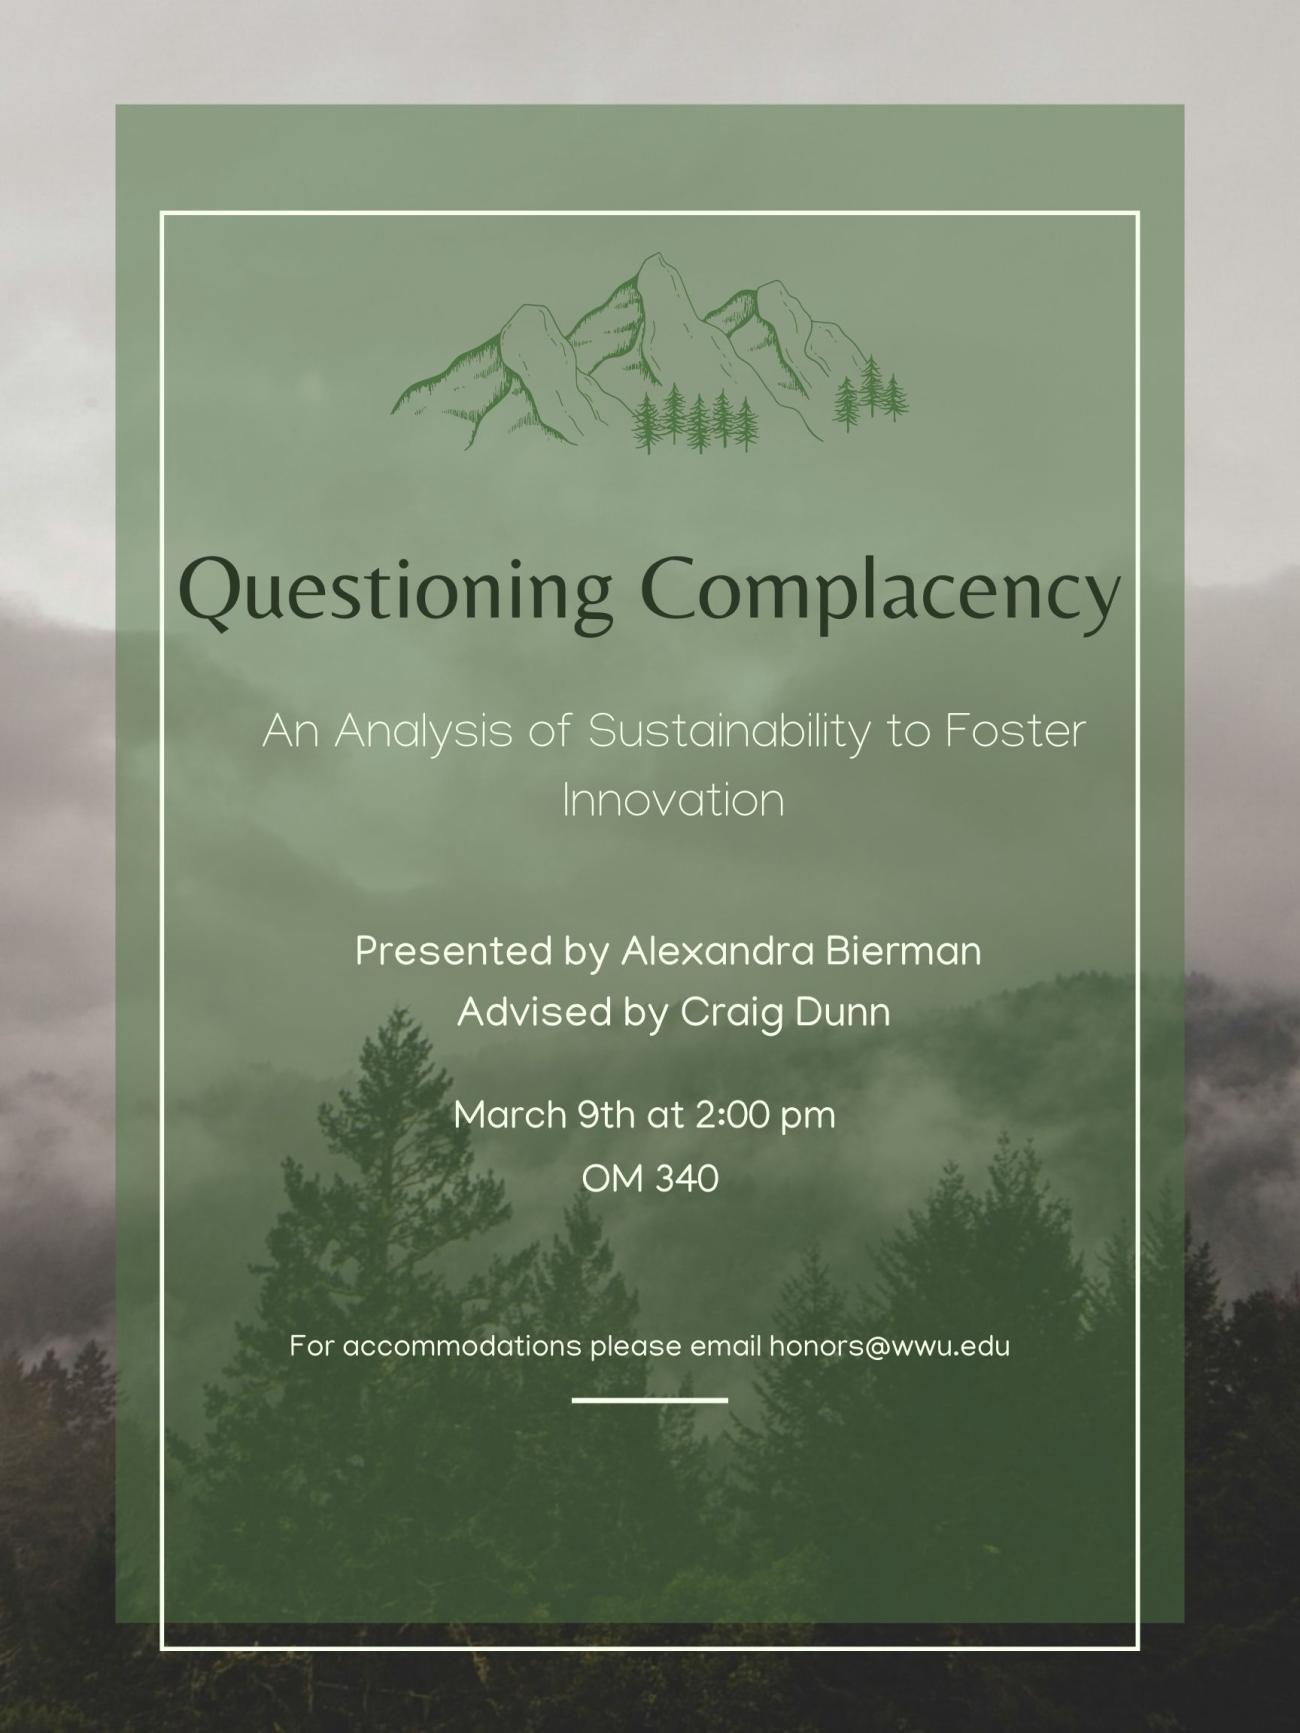 A green poster with mountains and trees. The text reads: "Questioning Complacency, An Analysis of Sustainability to Foster Innovation. Presented by Alexandria Bierman, Advised by Craig Dunn. March 9th at 2:00 pm in Old Main 340. For accommodations, please email honors@wwu.edu."